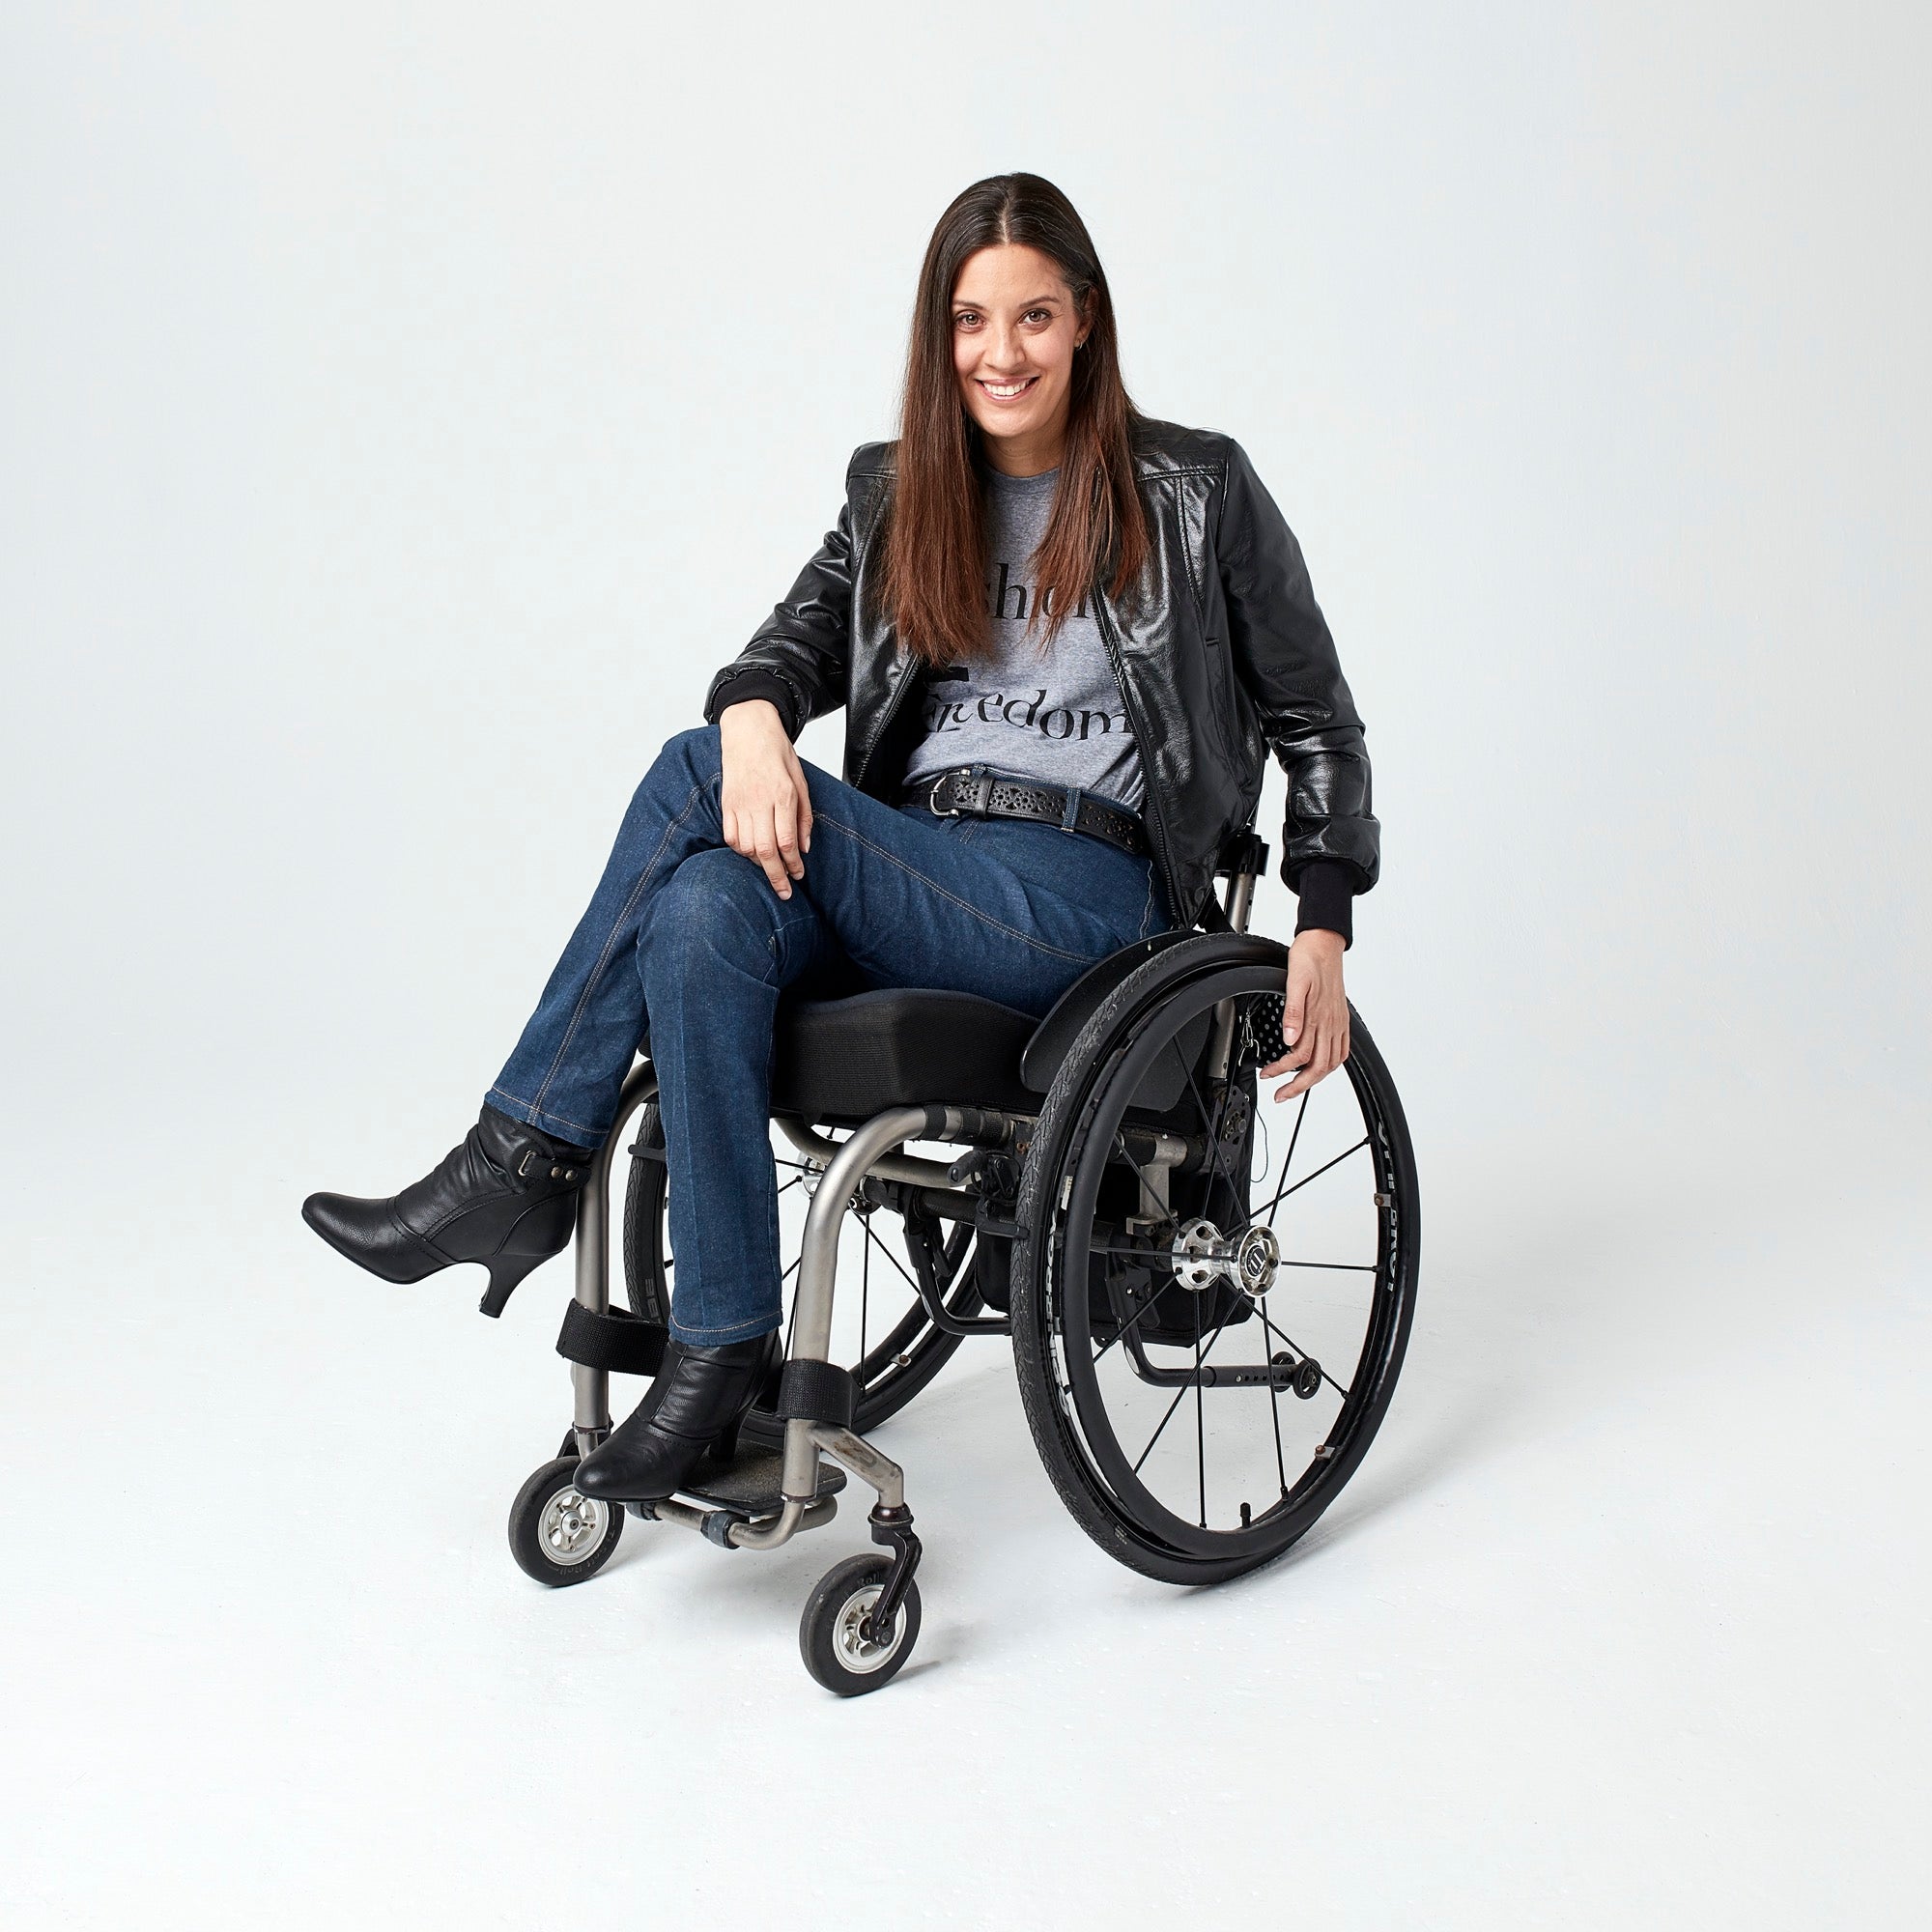 So Yes adaptive clothing - For people with physical disabilities